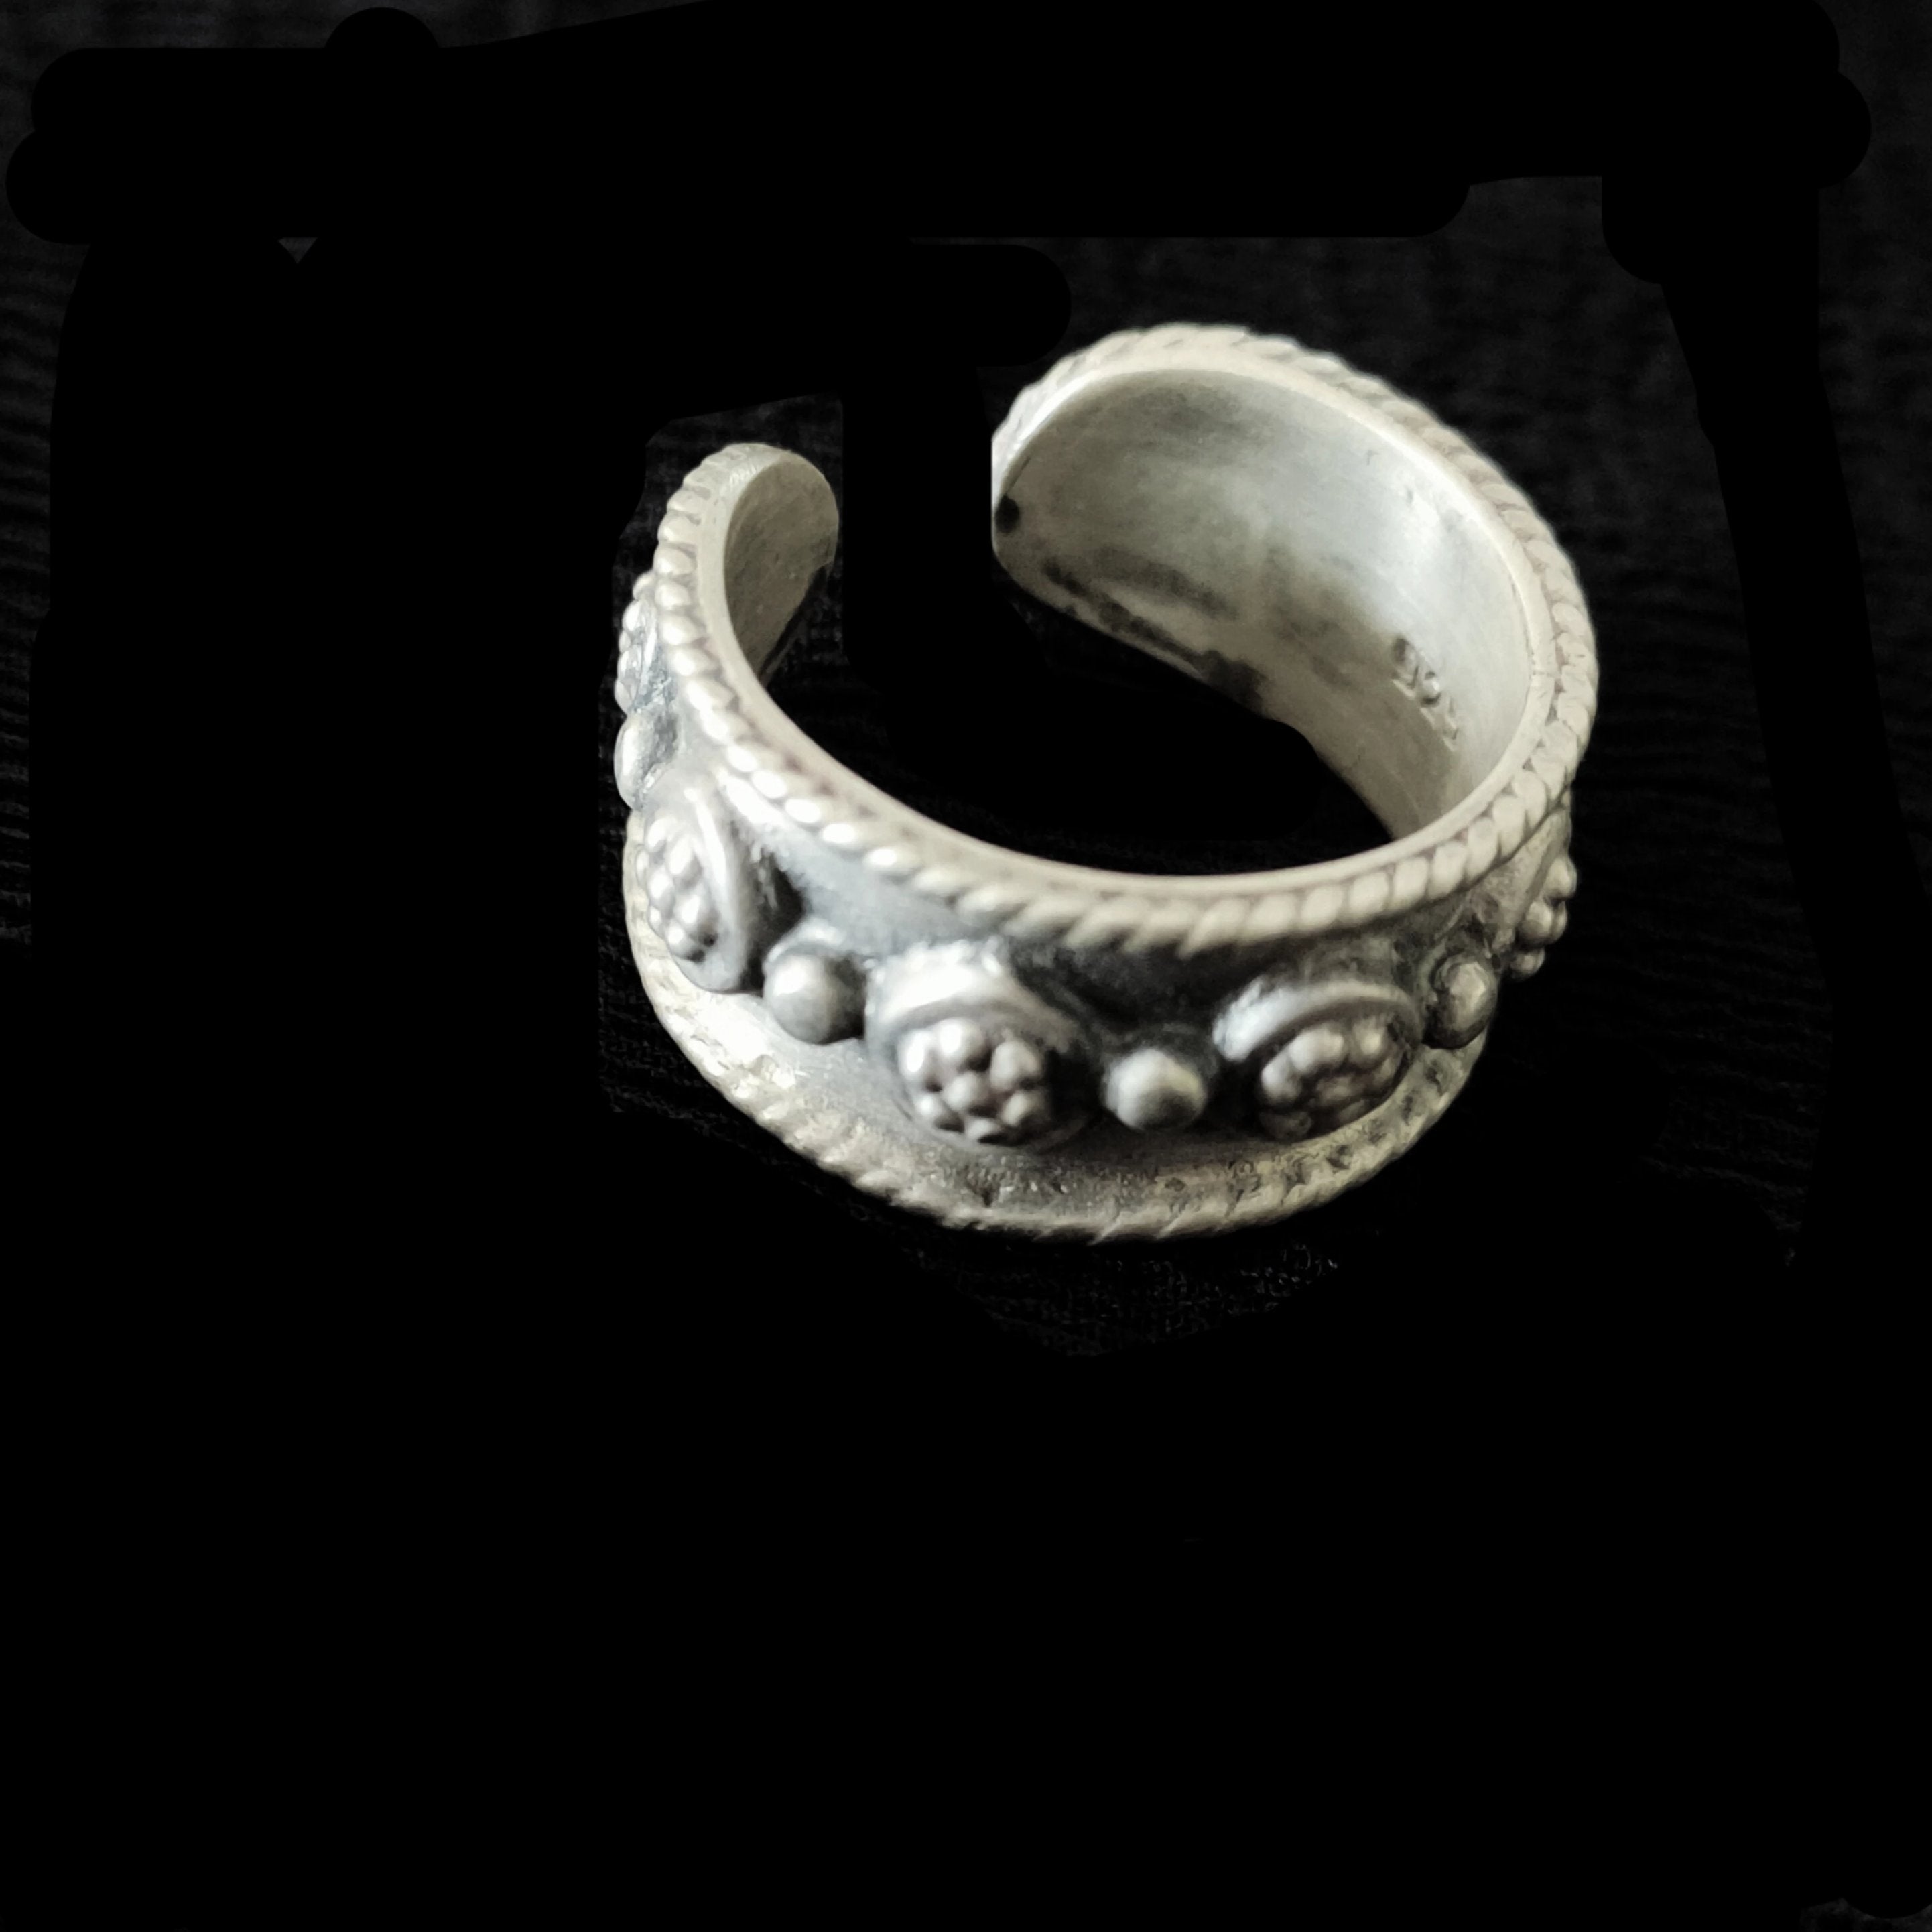 Unique pair of Oxidized Toe Rings Stylish and Latest